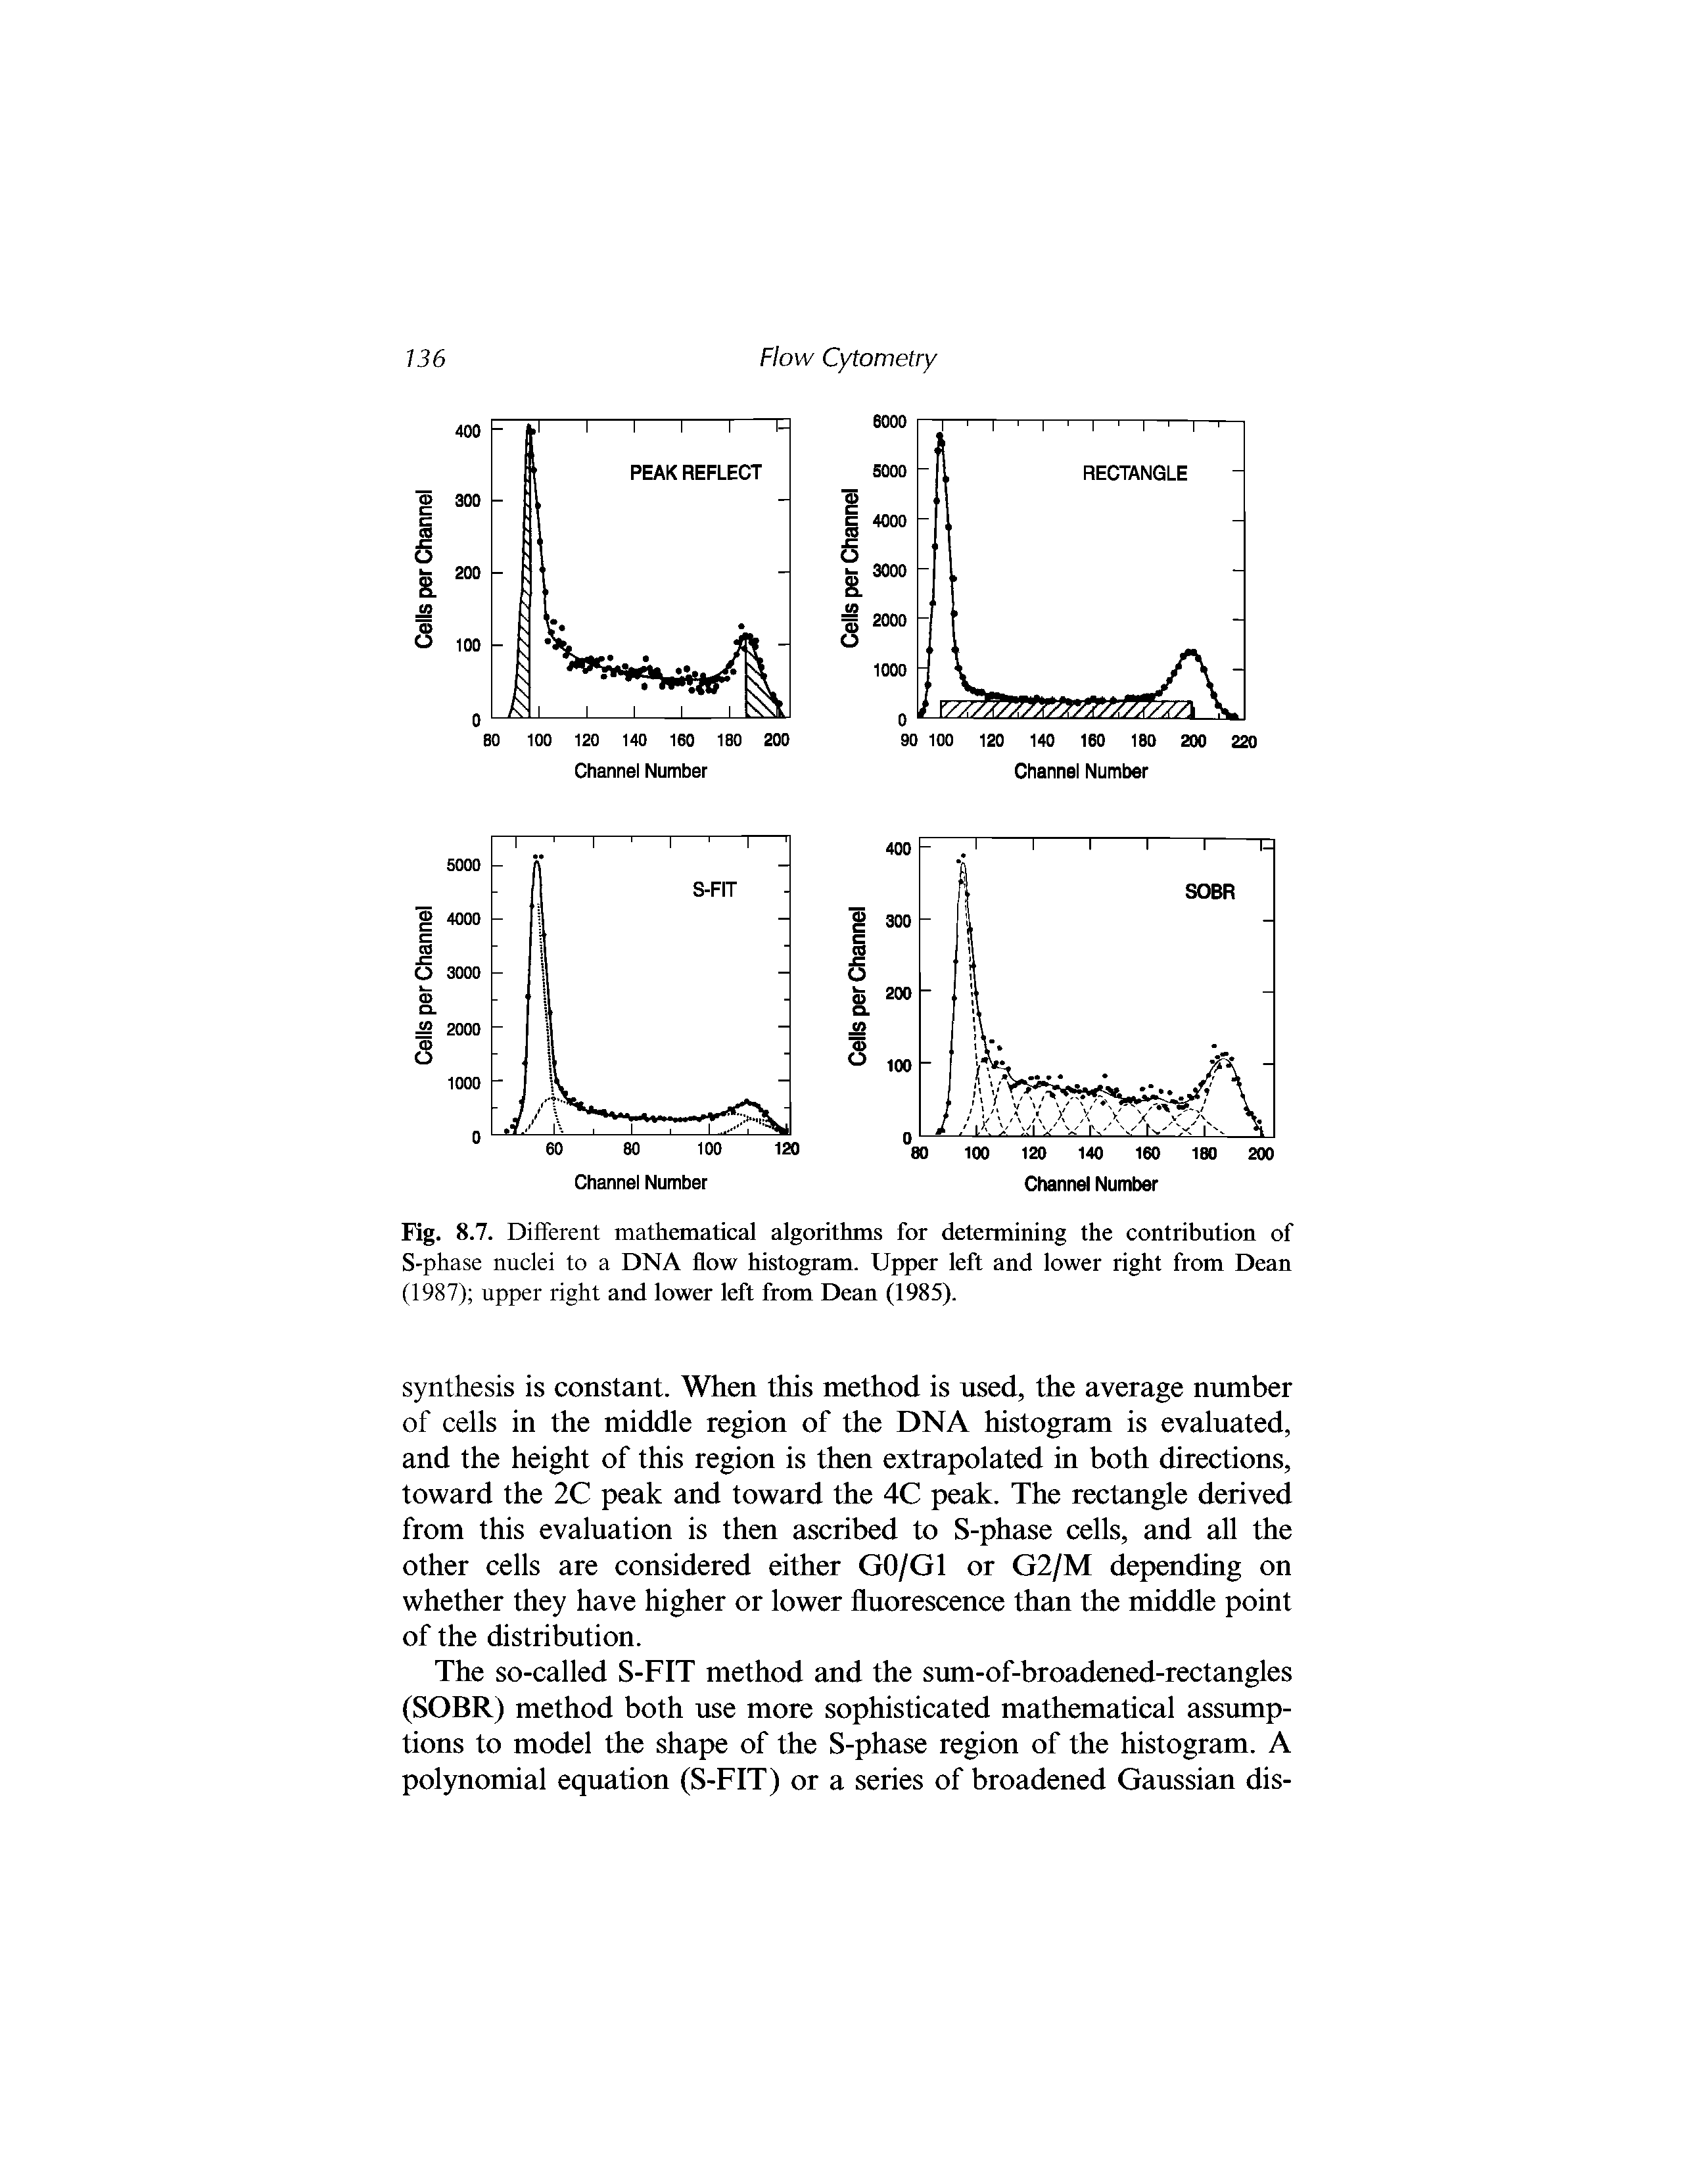 Fig. 8.7. Different mathematical algorithms for determining the contribution of S-phase nuclei to a DNA flow histogram. Upper left and lower right from Dean (1987) upper right and lower left from Dean (1985).